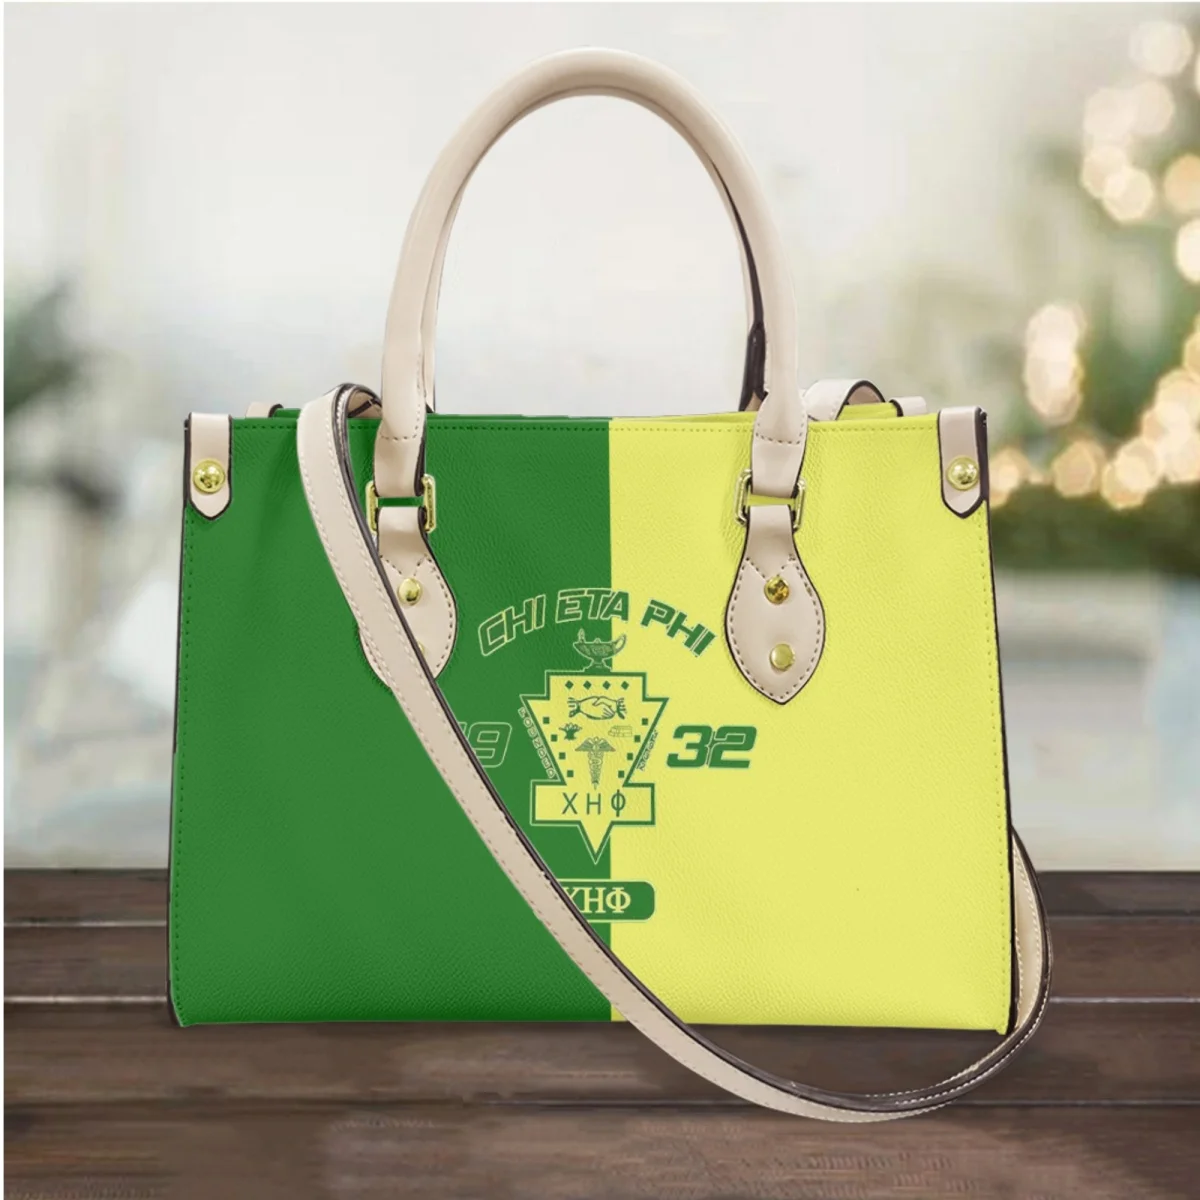 Black Woman Sorority Tote Bag Aesthetic Vintage Designer Handbags for Women Shopping  Bags with Travel Grocery Shopping - AliExpress